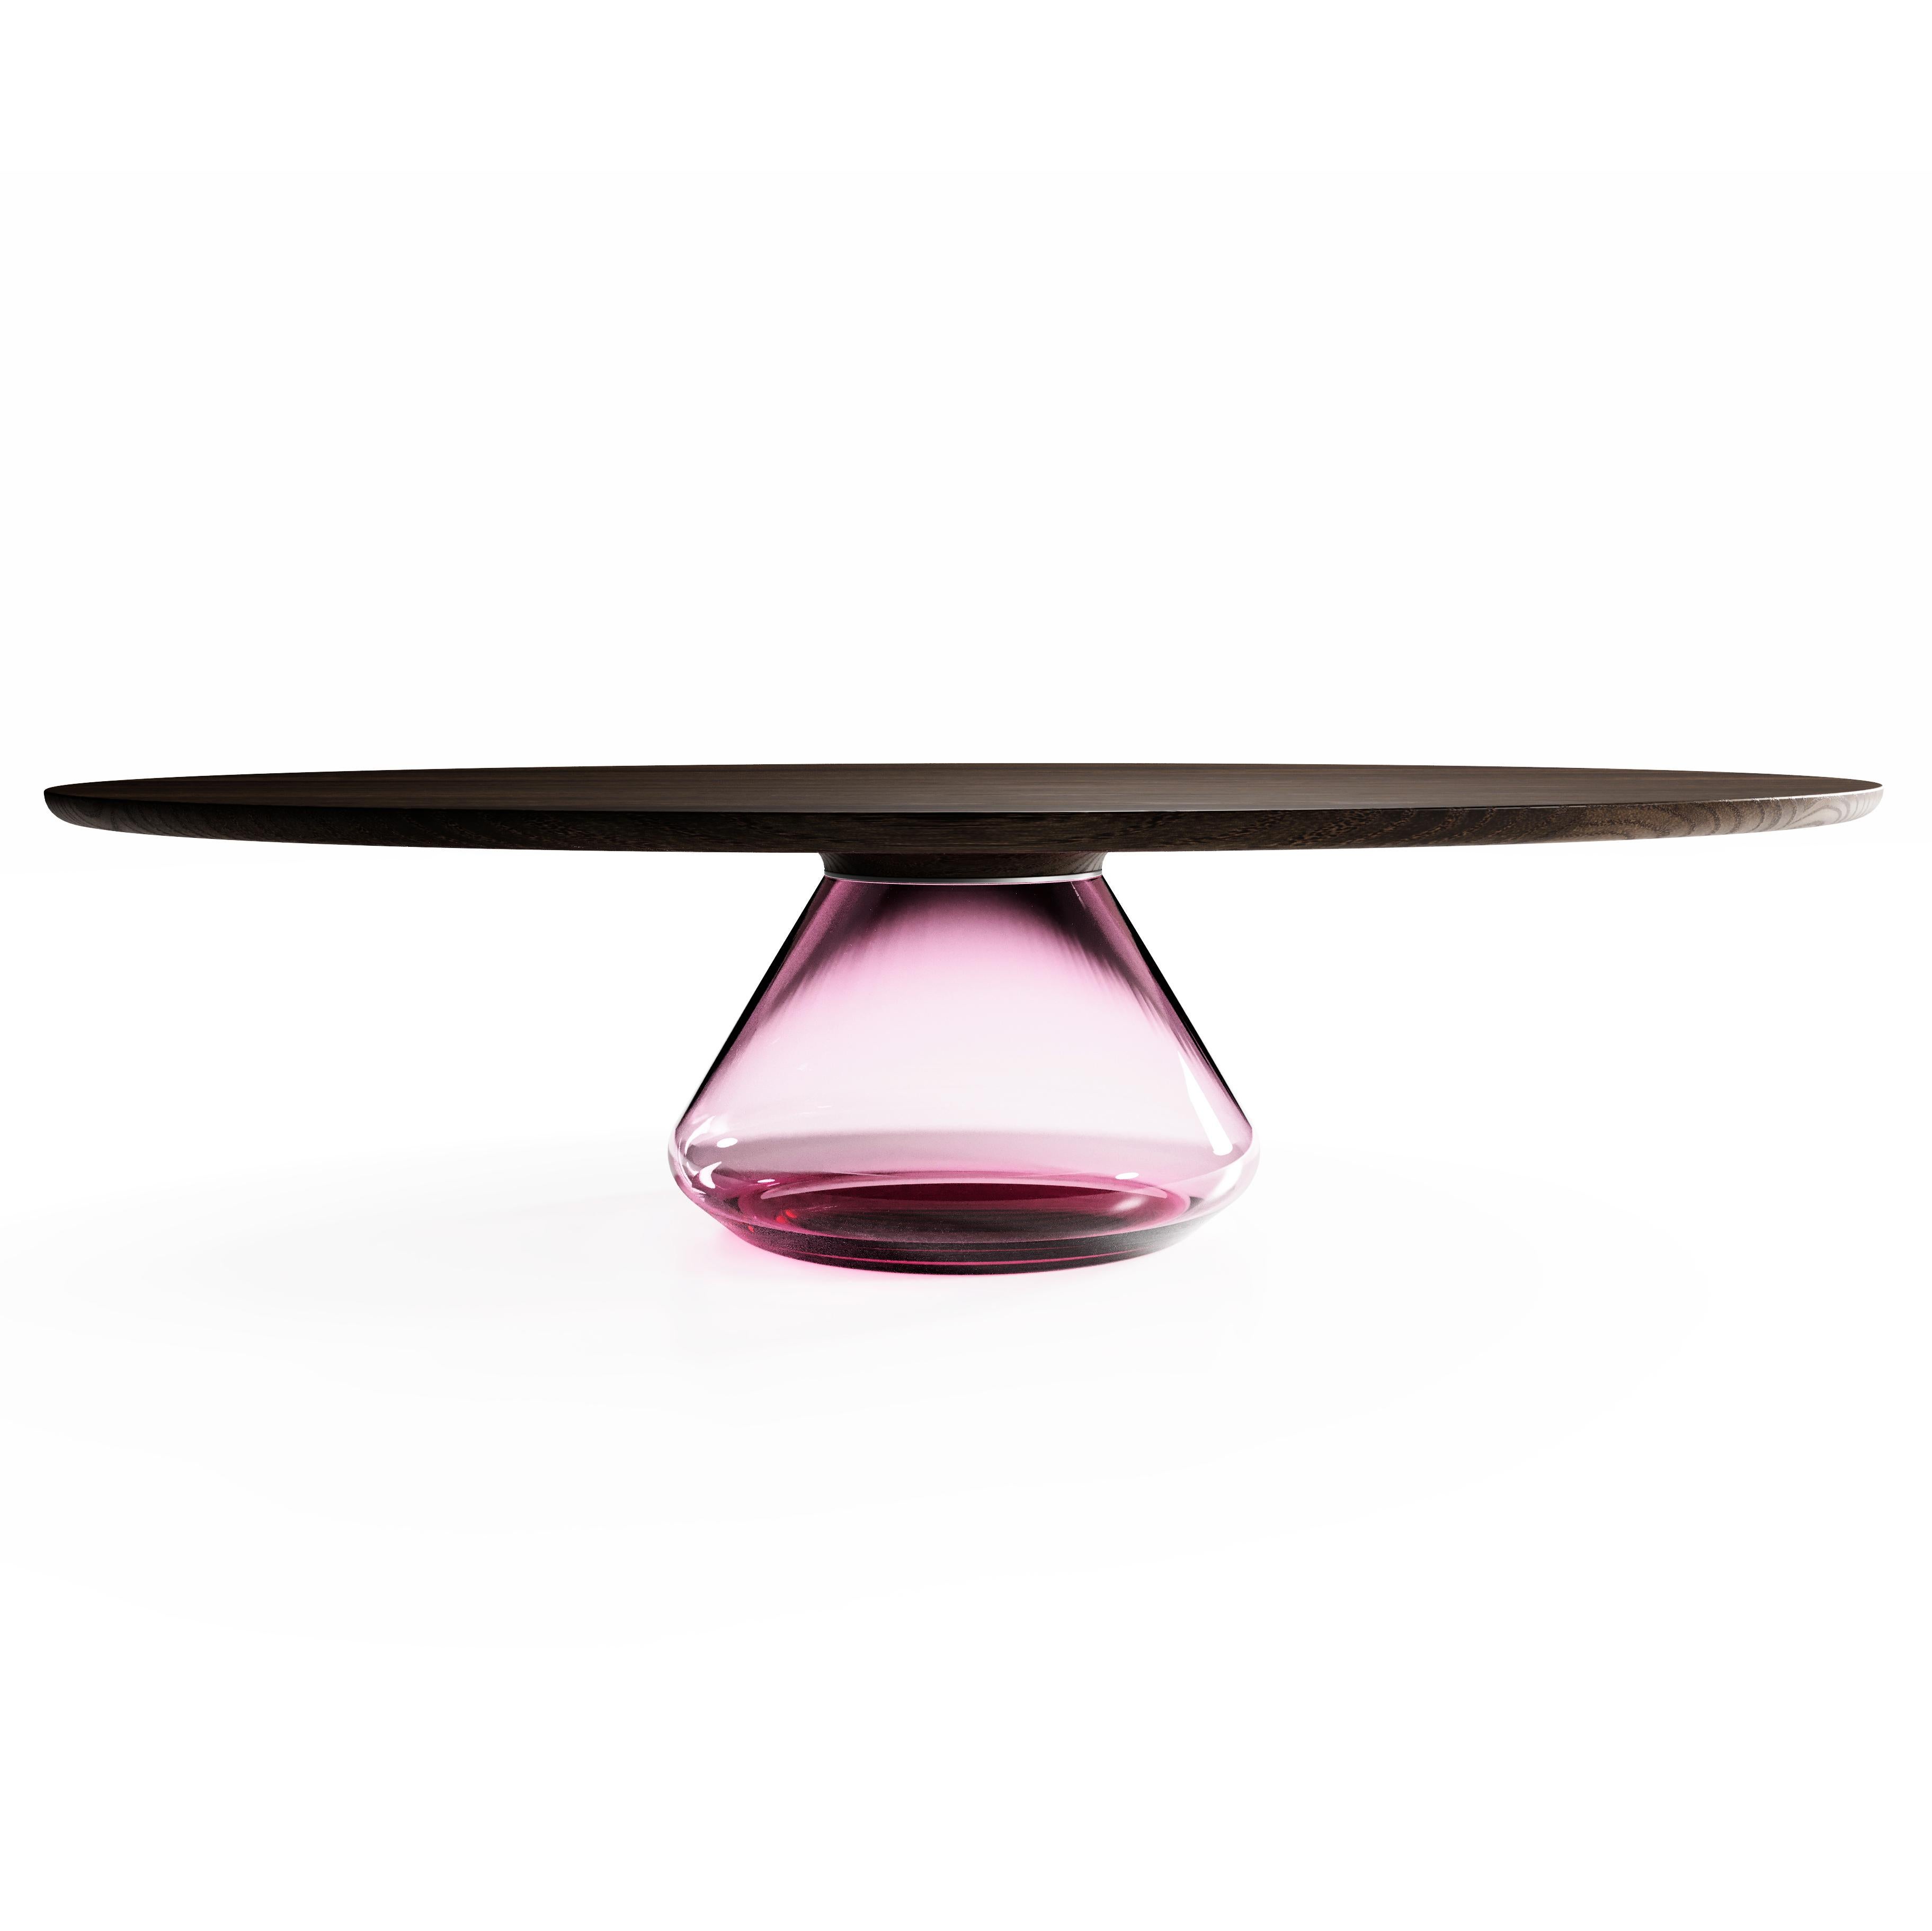 The pink lady Eclipse I, limited edition coffee table by Grzegorz Majka
Limited edition of 8
Dimensions: 54 x 48 x 14 in
Materials: glass, oak

The total eclipse of every interior? With this amazing table everything is possible as with its